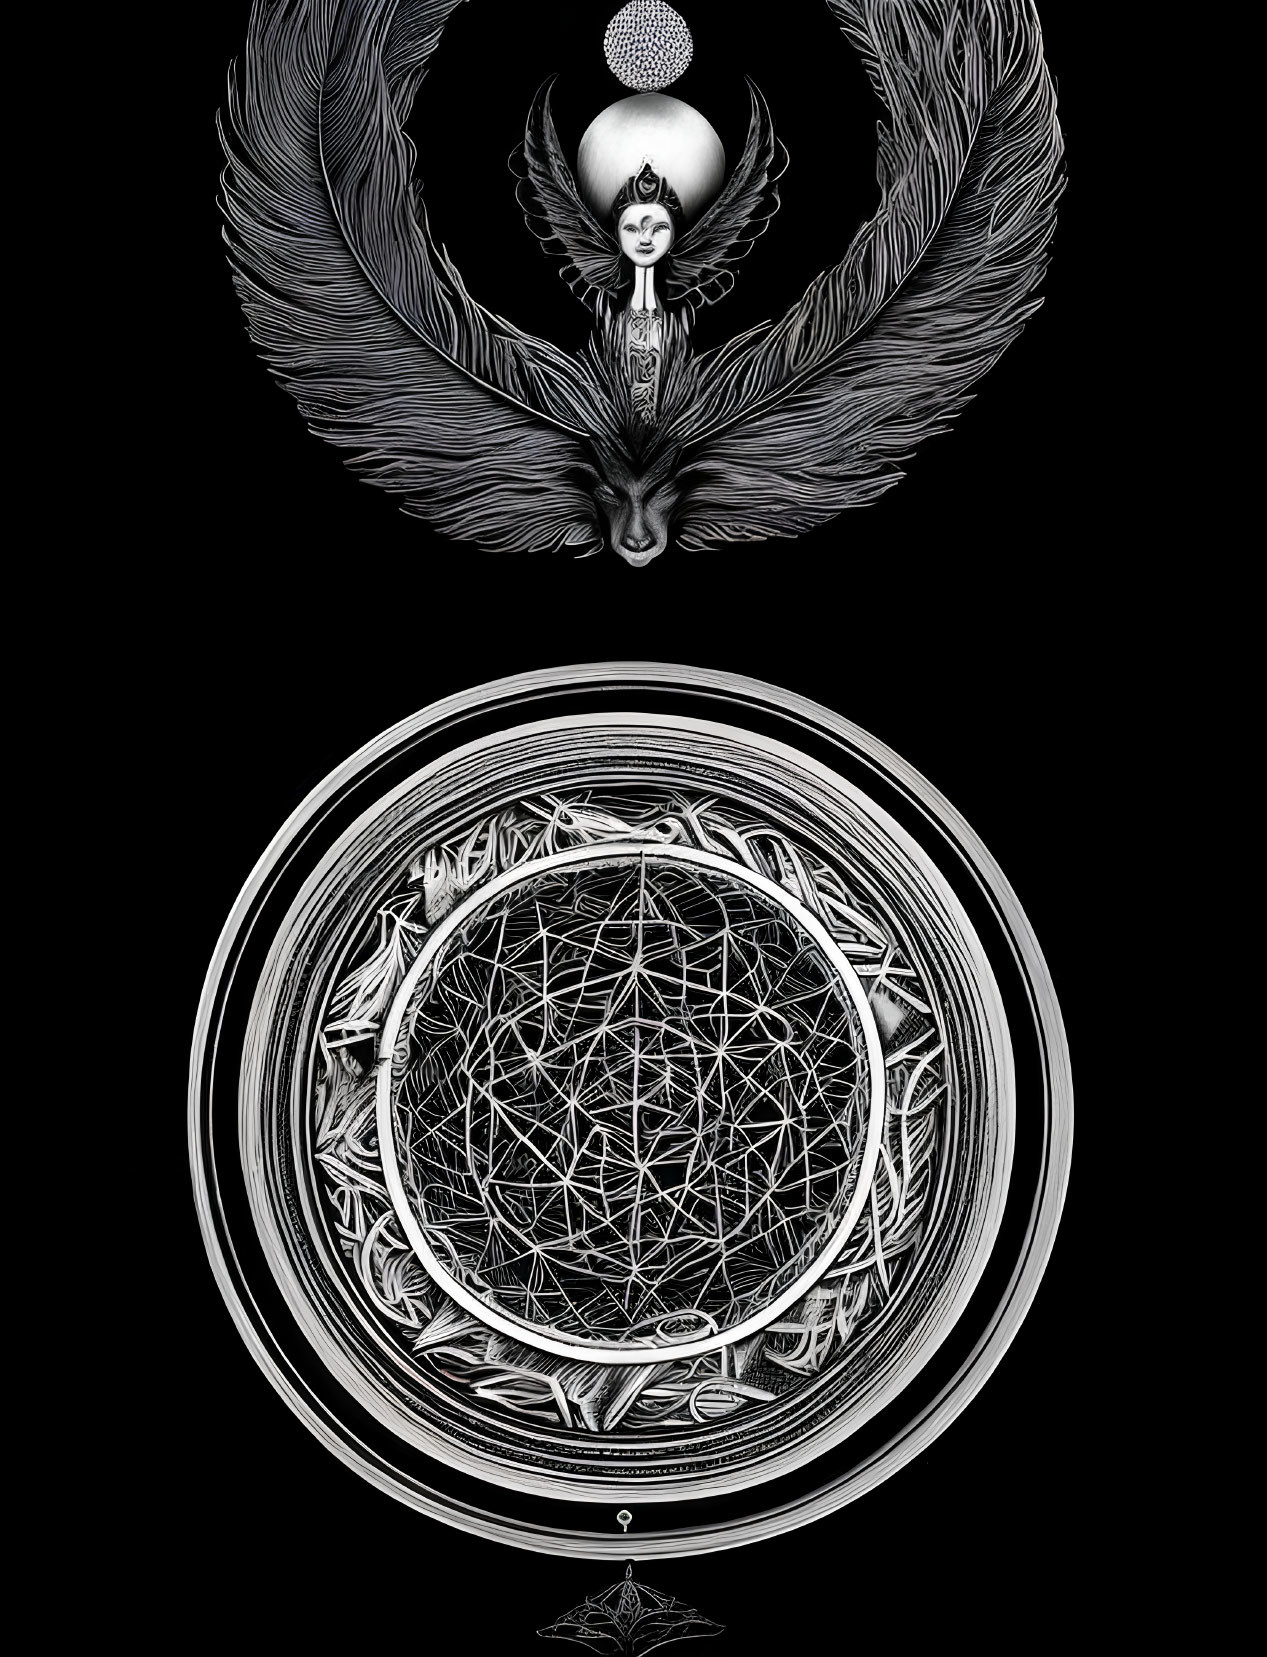 Detailed black-and-white mandala art with winged figure and esoteric symbols